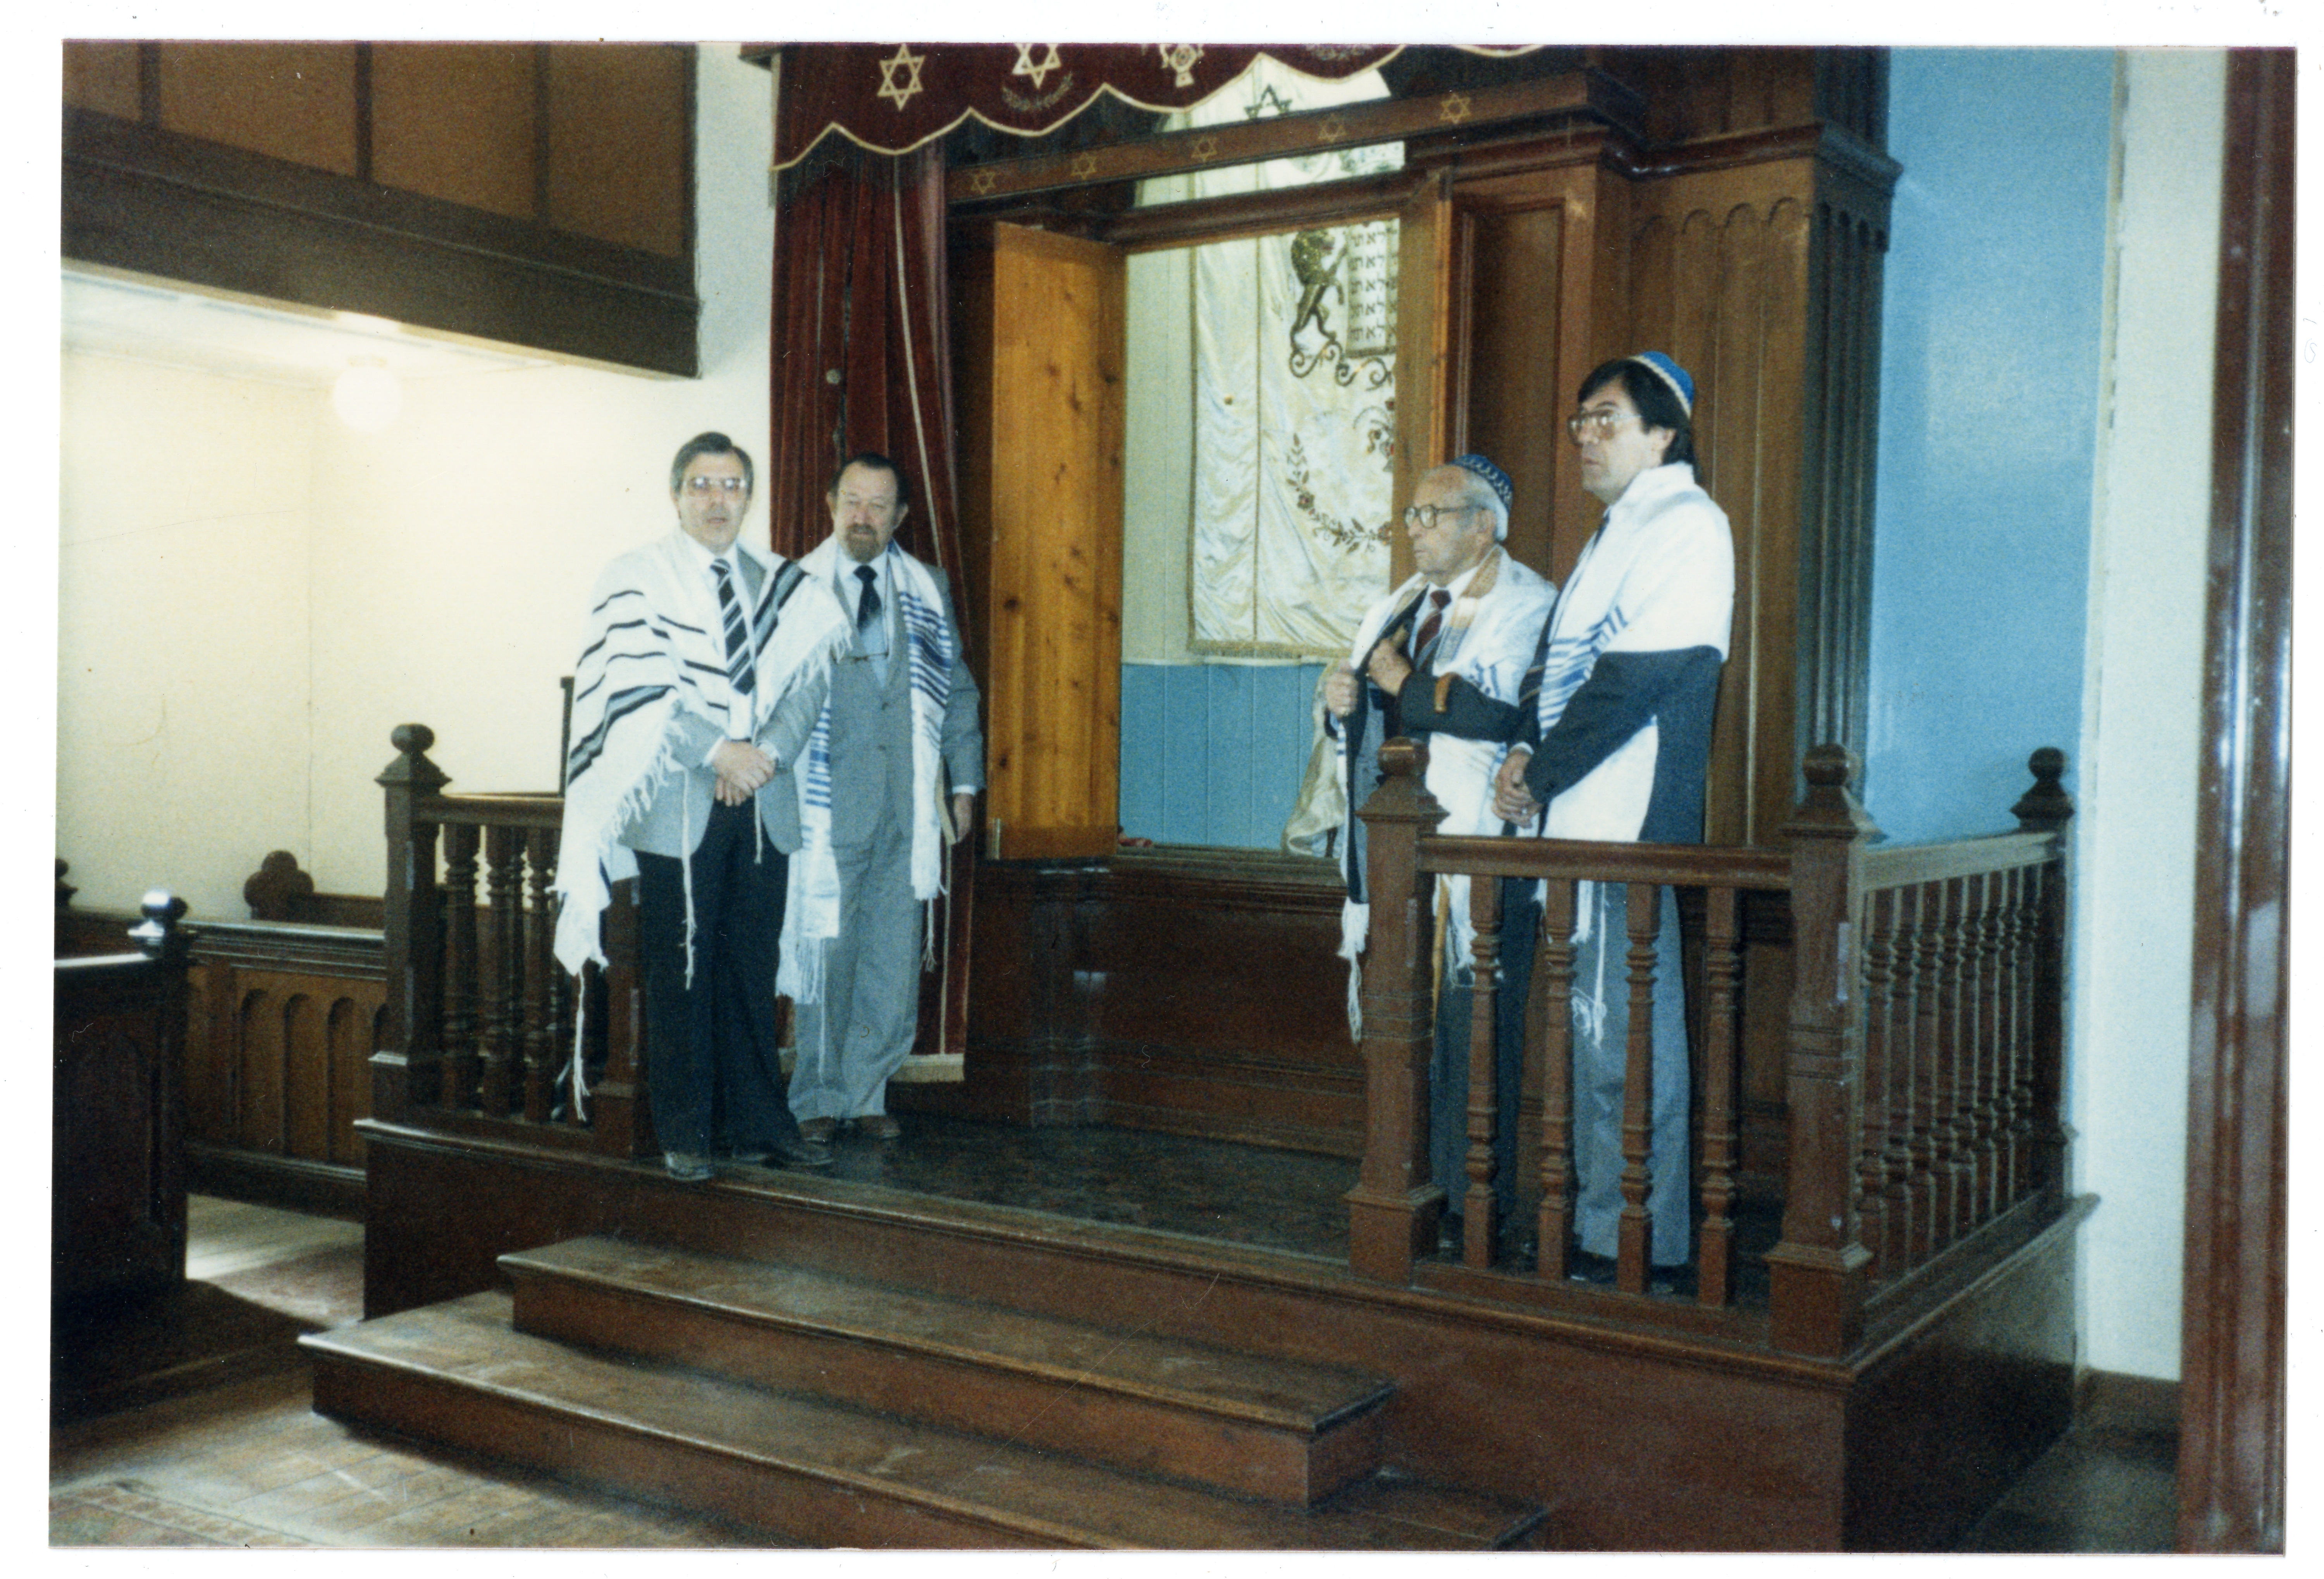 Max Skuy at the closing of the synagogue in Vryheid